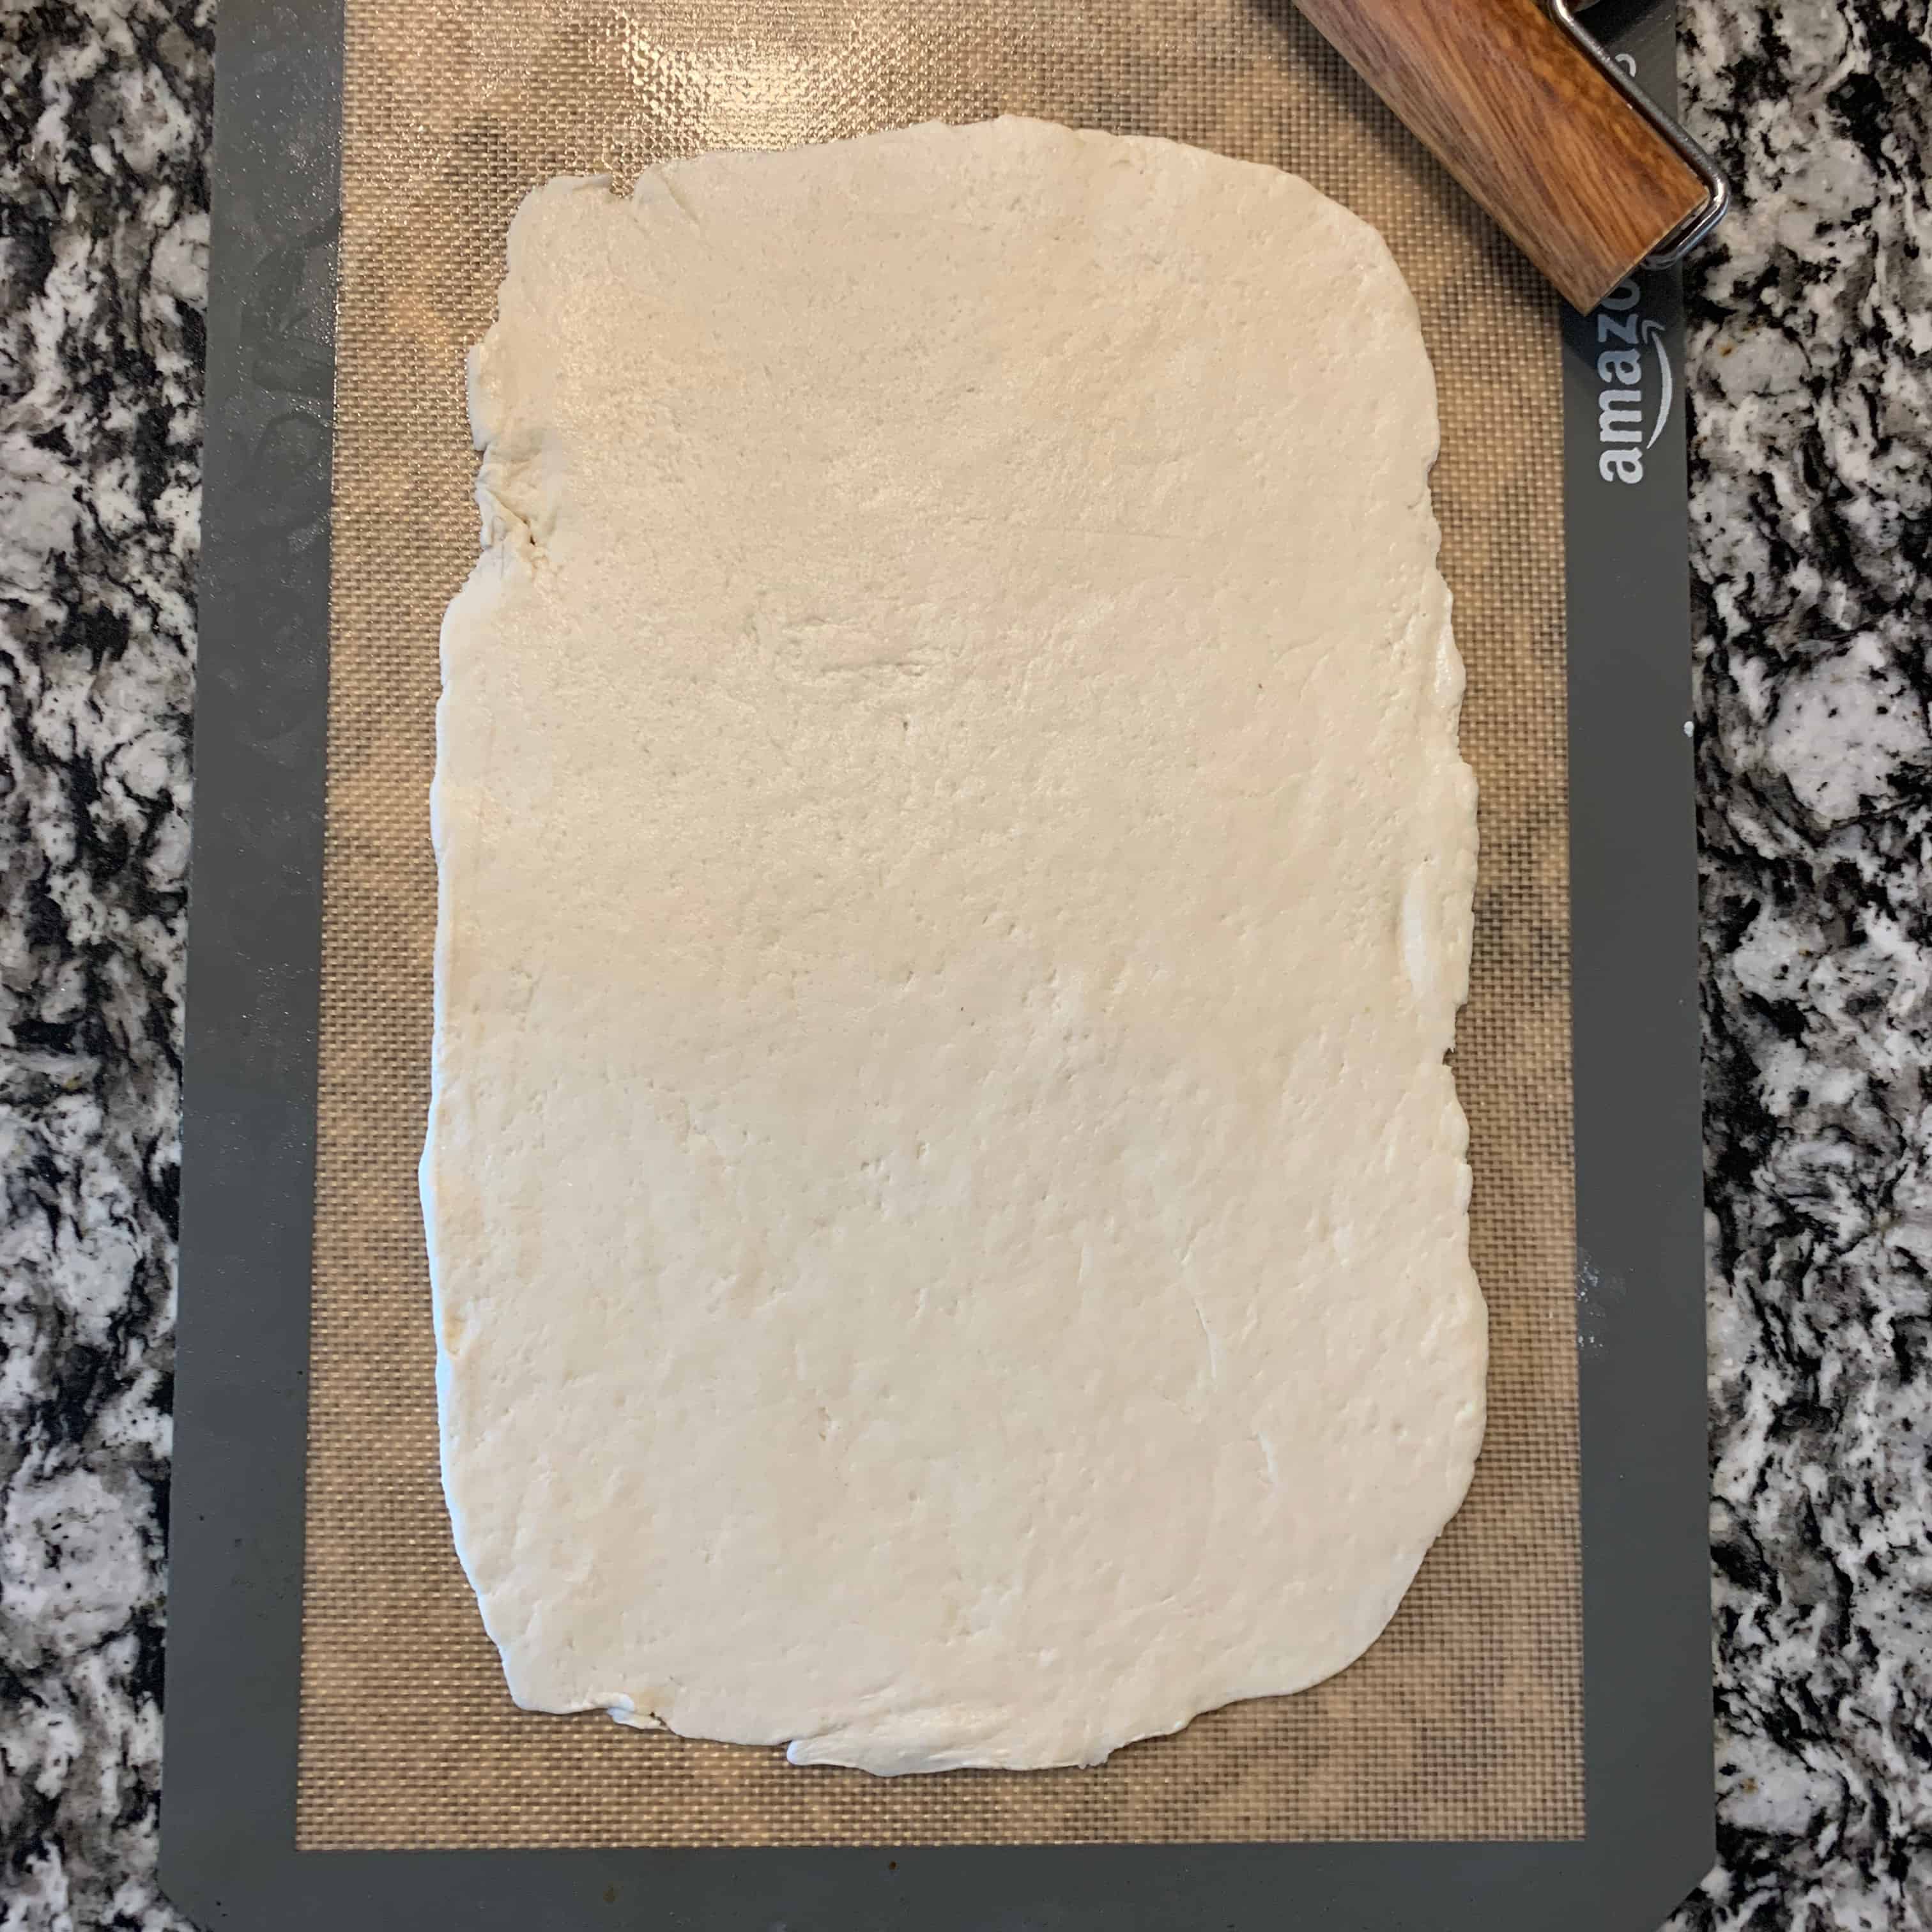 pizza crust dough rolled out on a baking mat